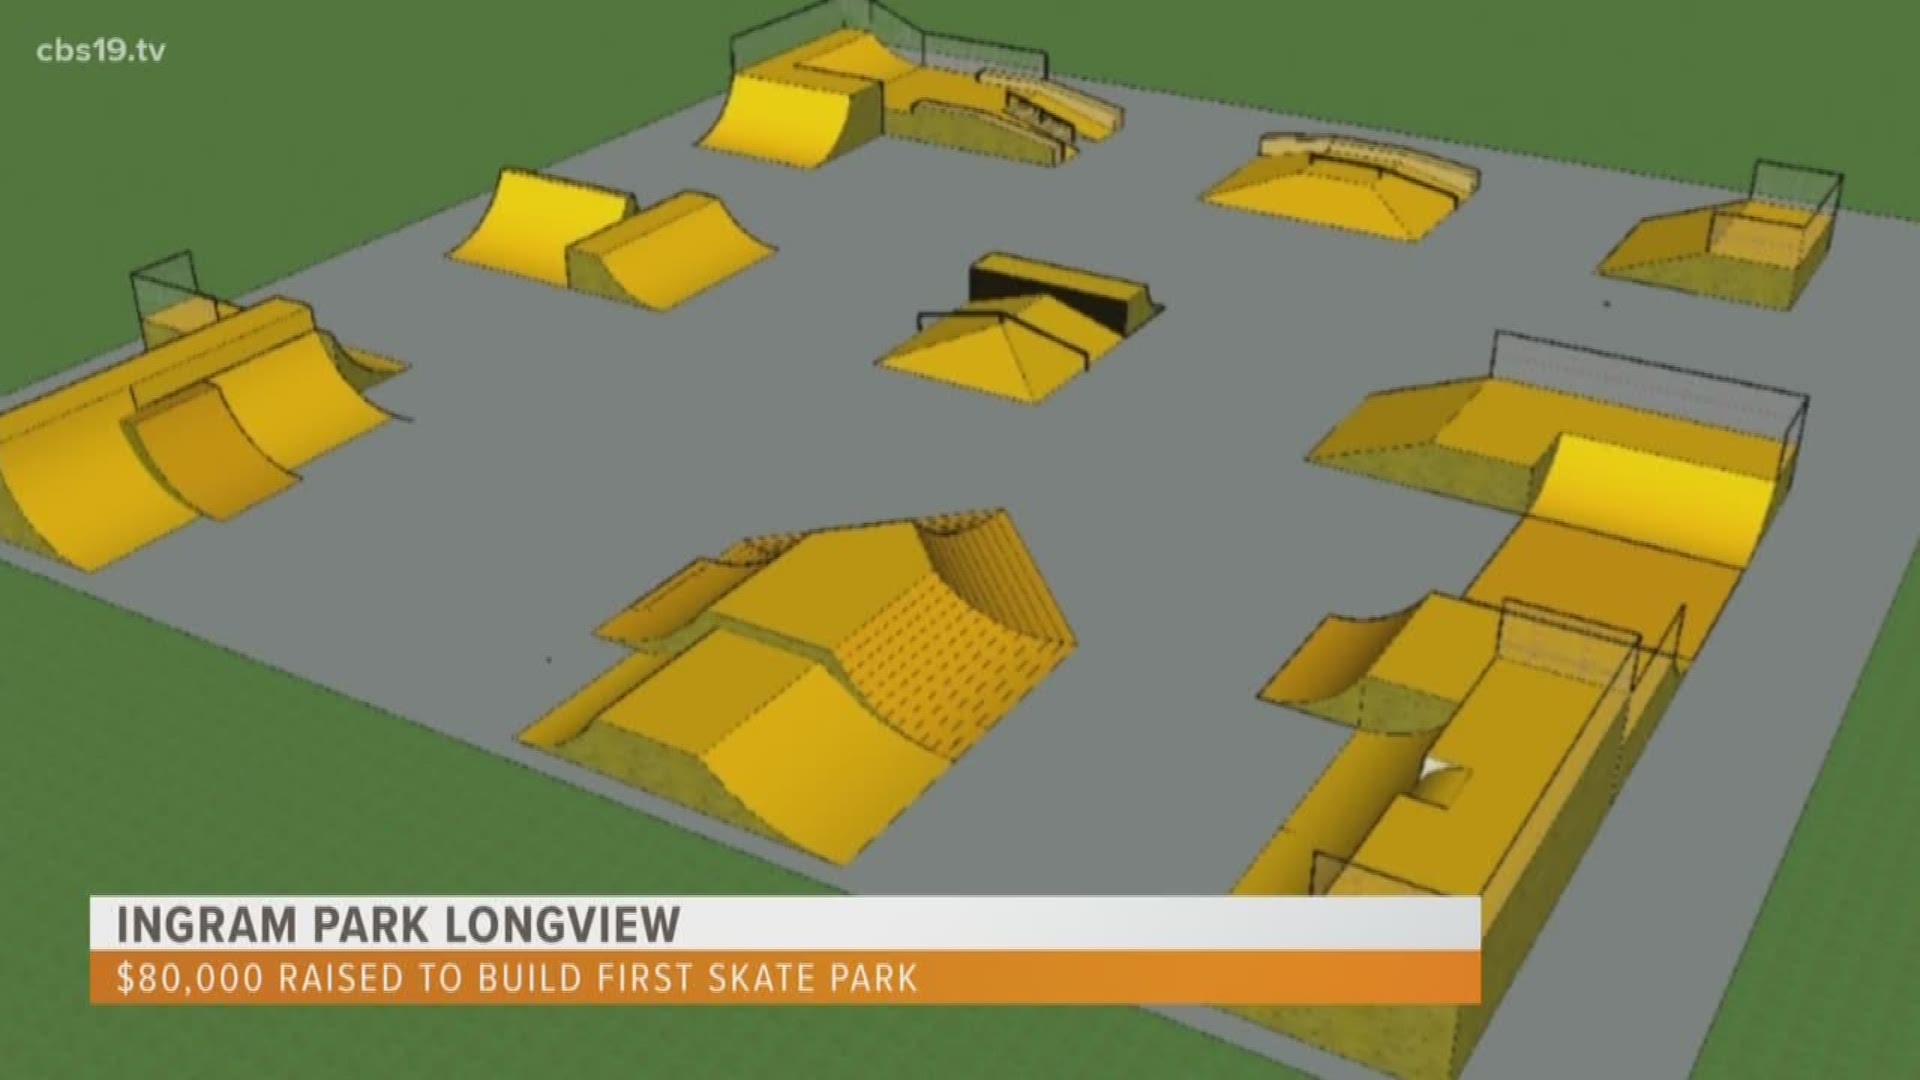 The City of Longview is set to build a skatepark in February. It will be located in Ingram Park.